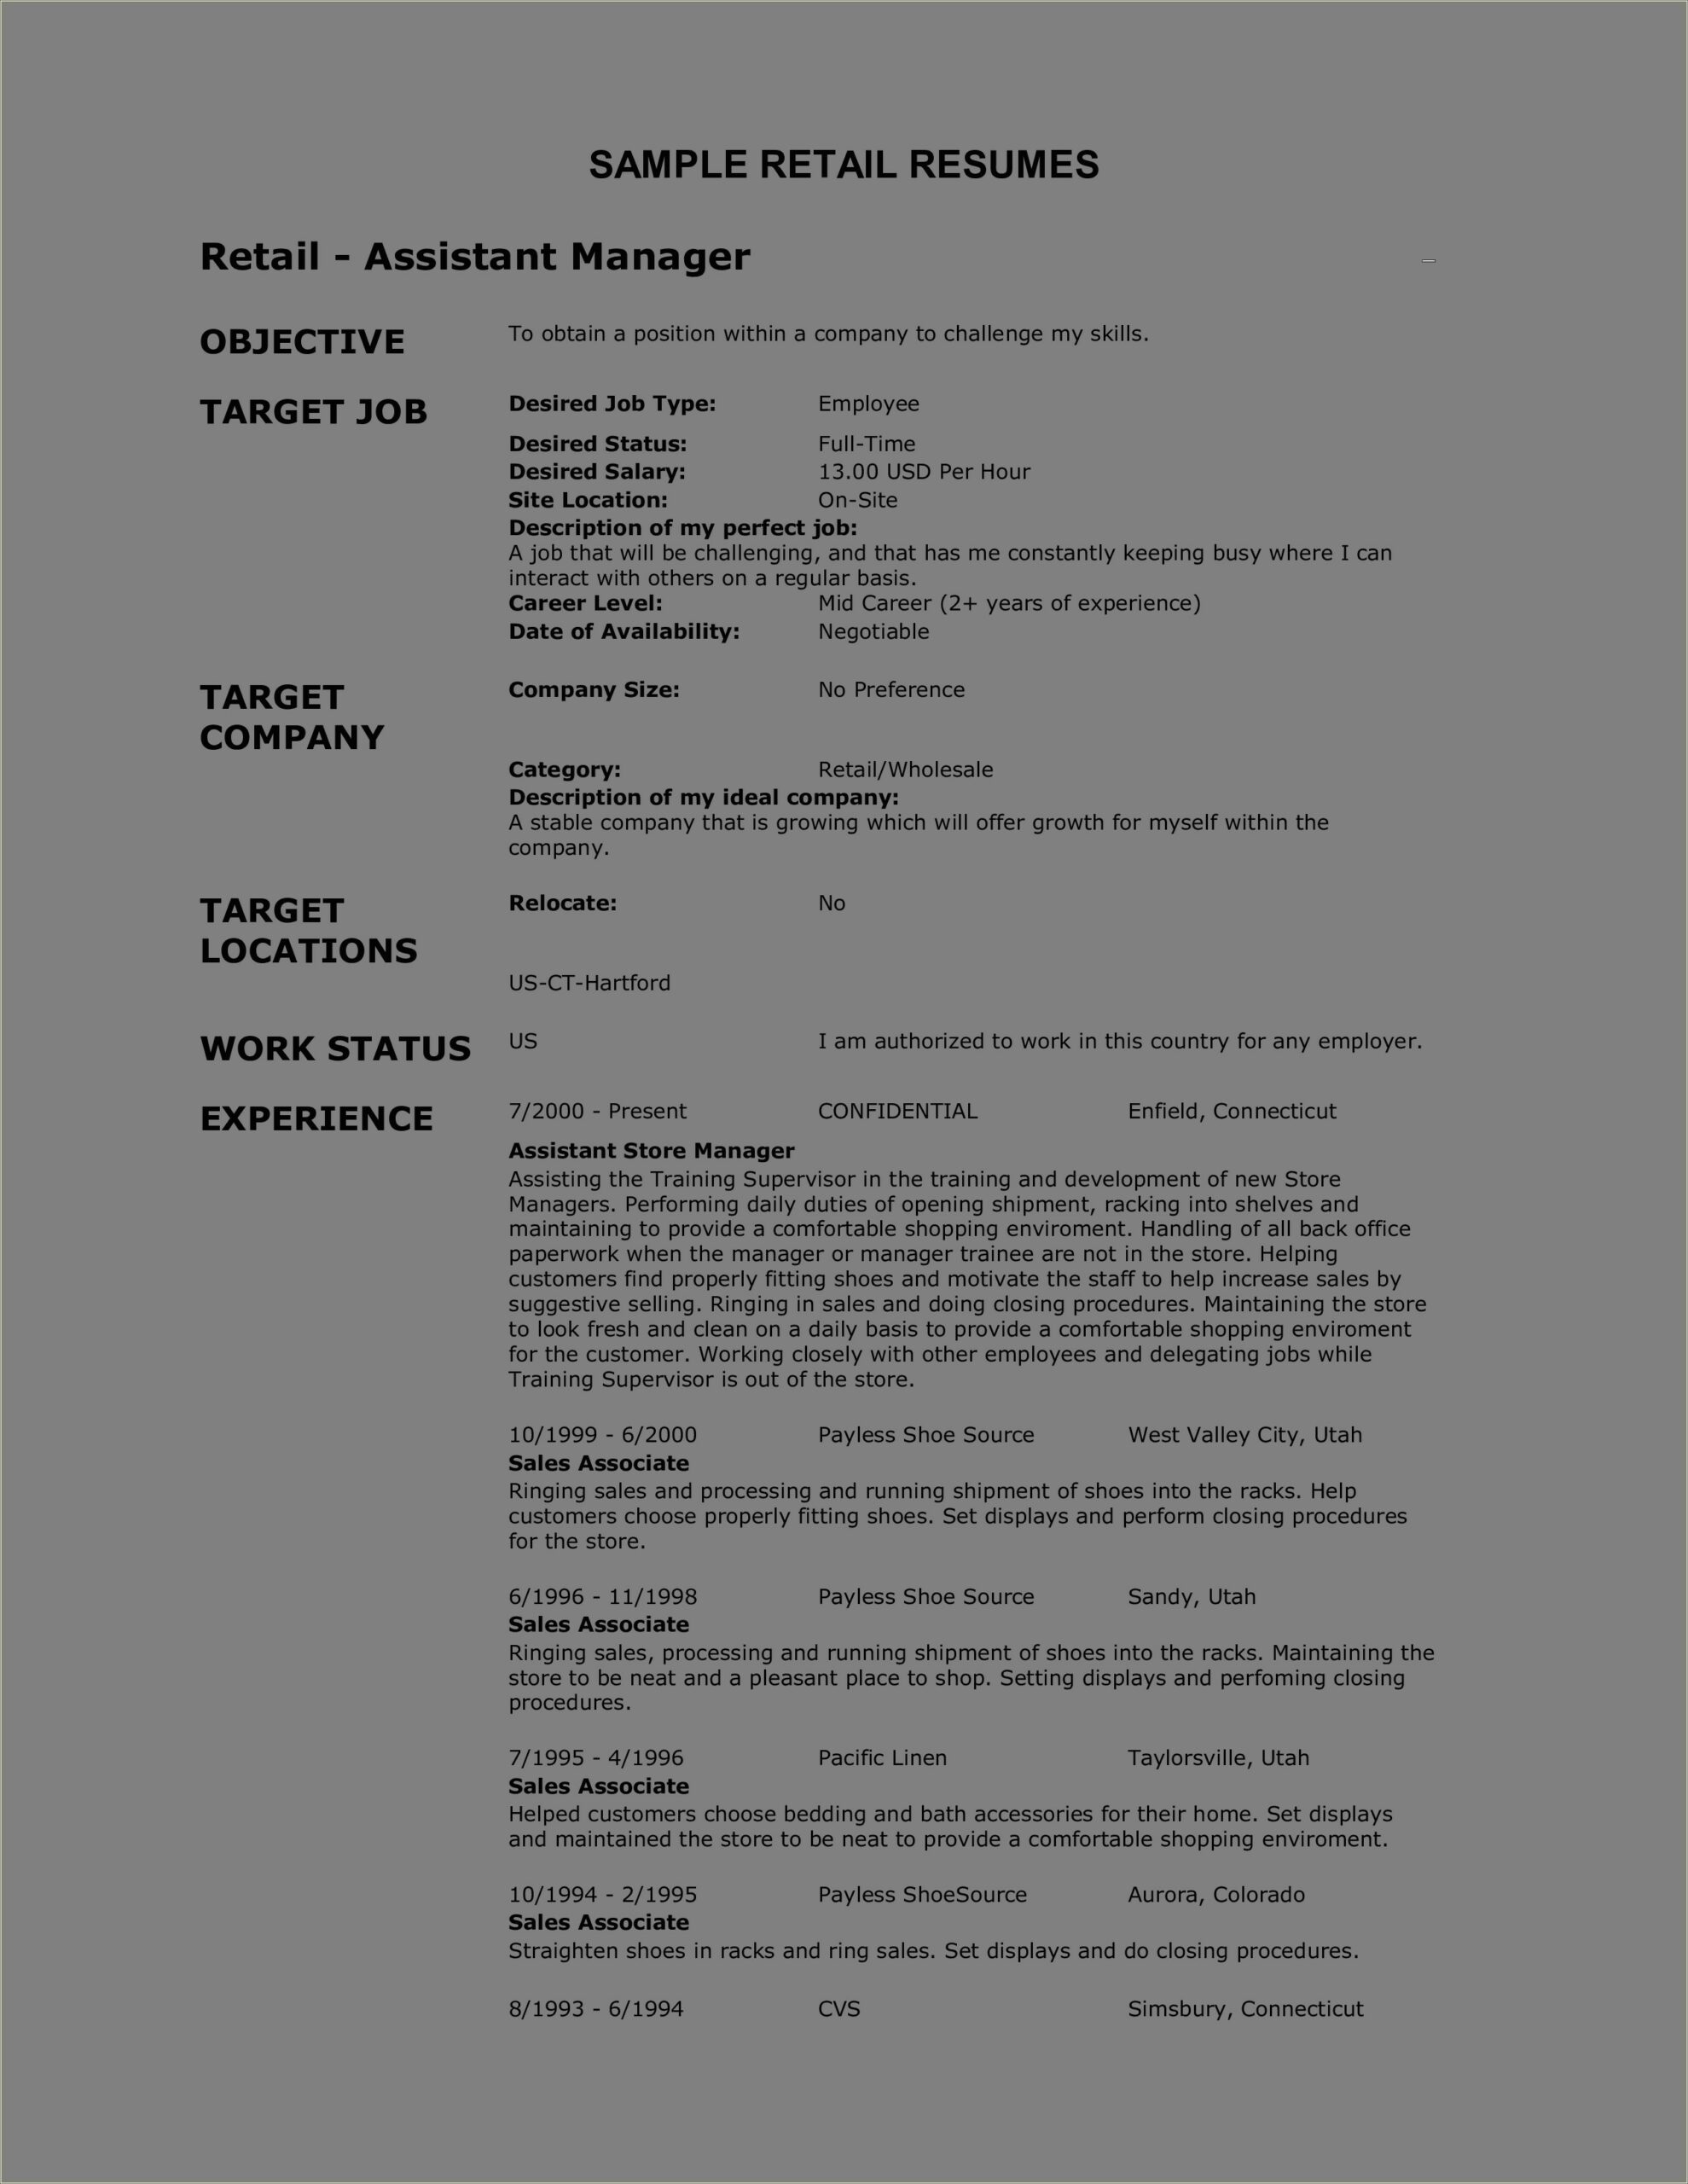 Sample Resume For A Retail Position